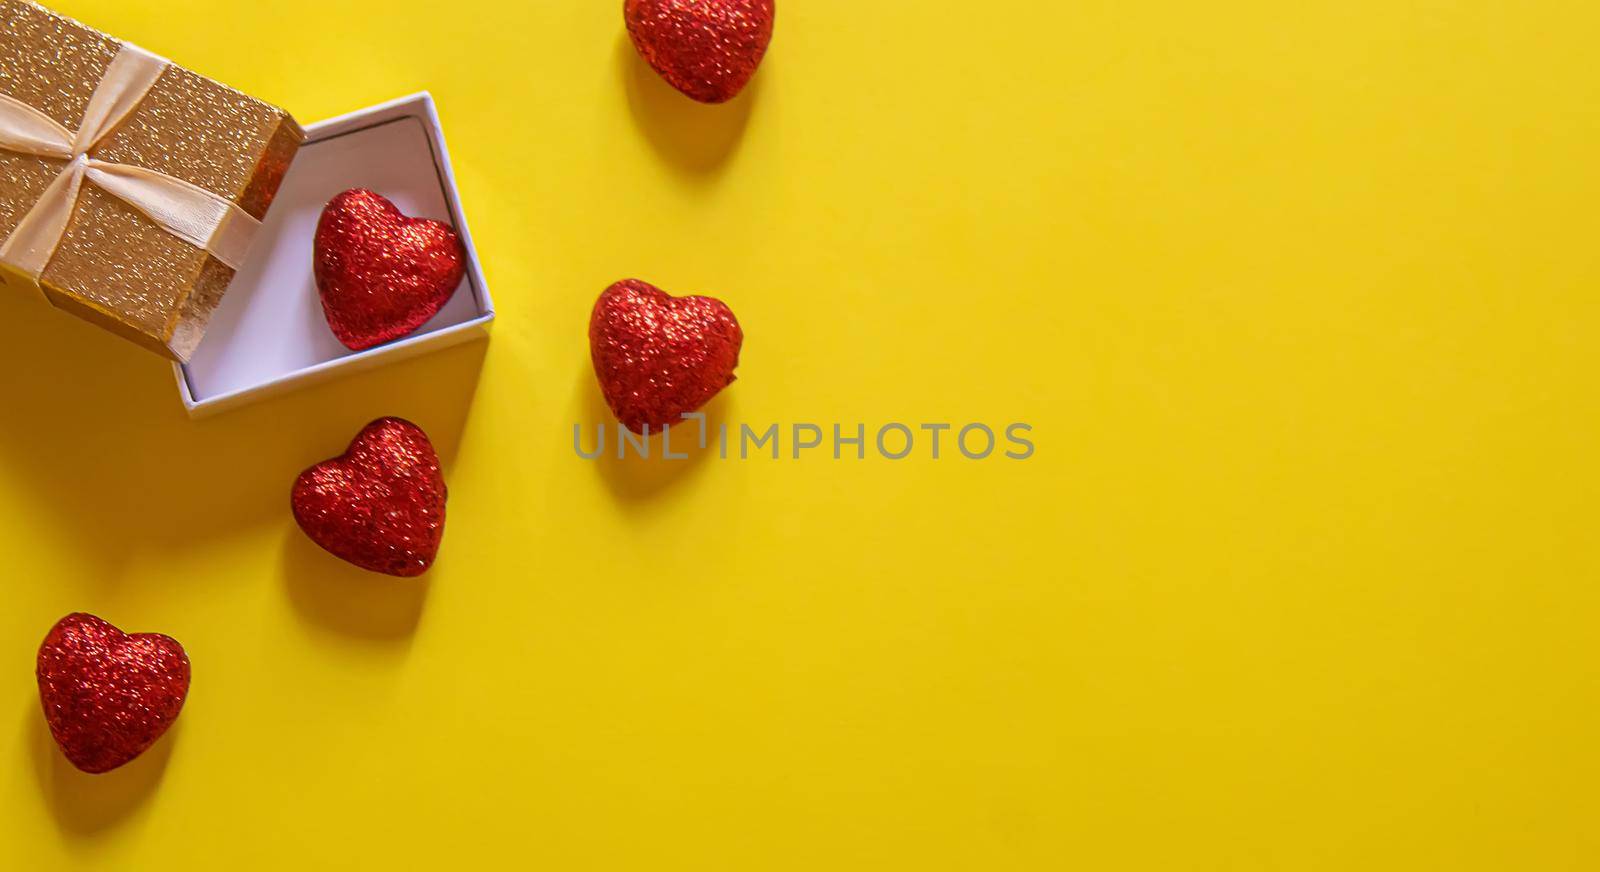 Valentine's day background. Gifts. Envelope. Hearts in a box. Valentine's day concept. Selective focus.holidays